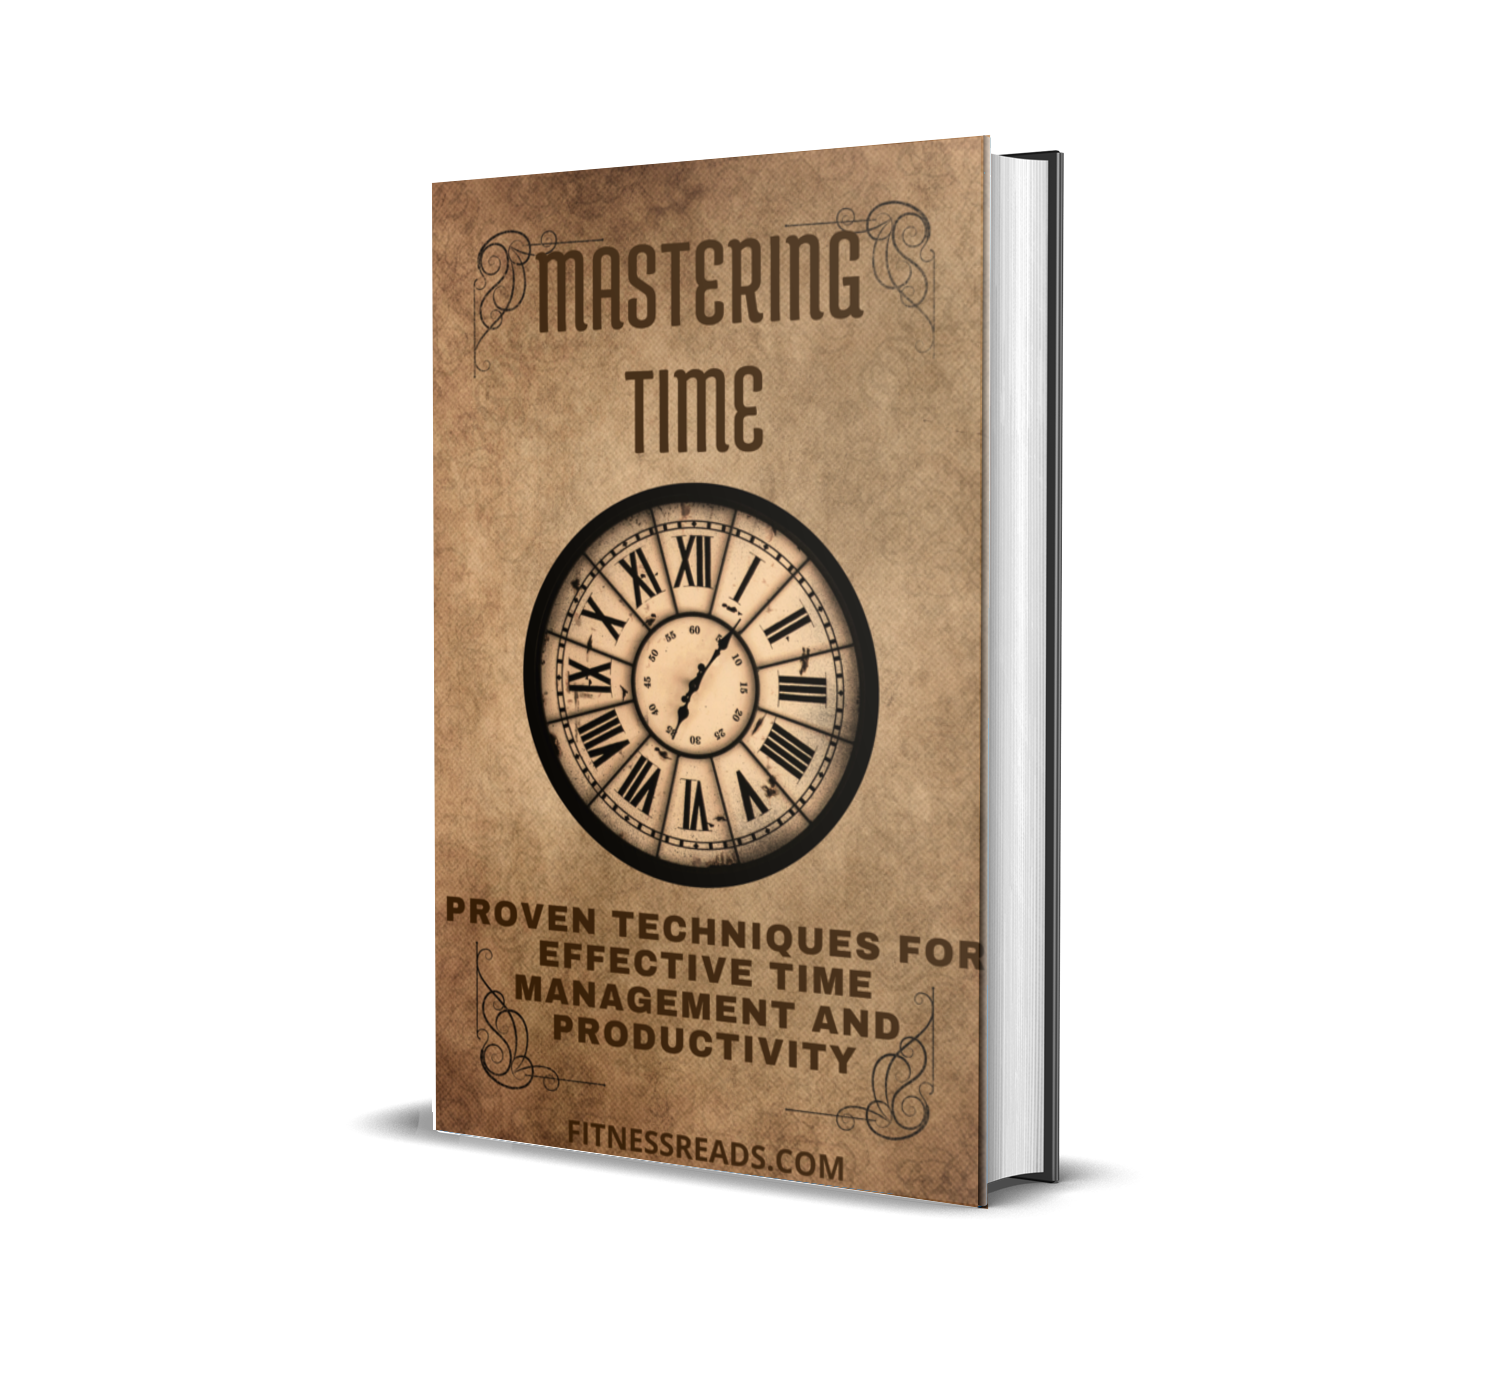 Mastering Time: Proven Techniques for Effective Time Management and Productivity